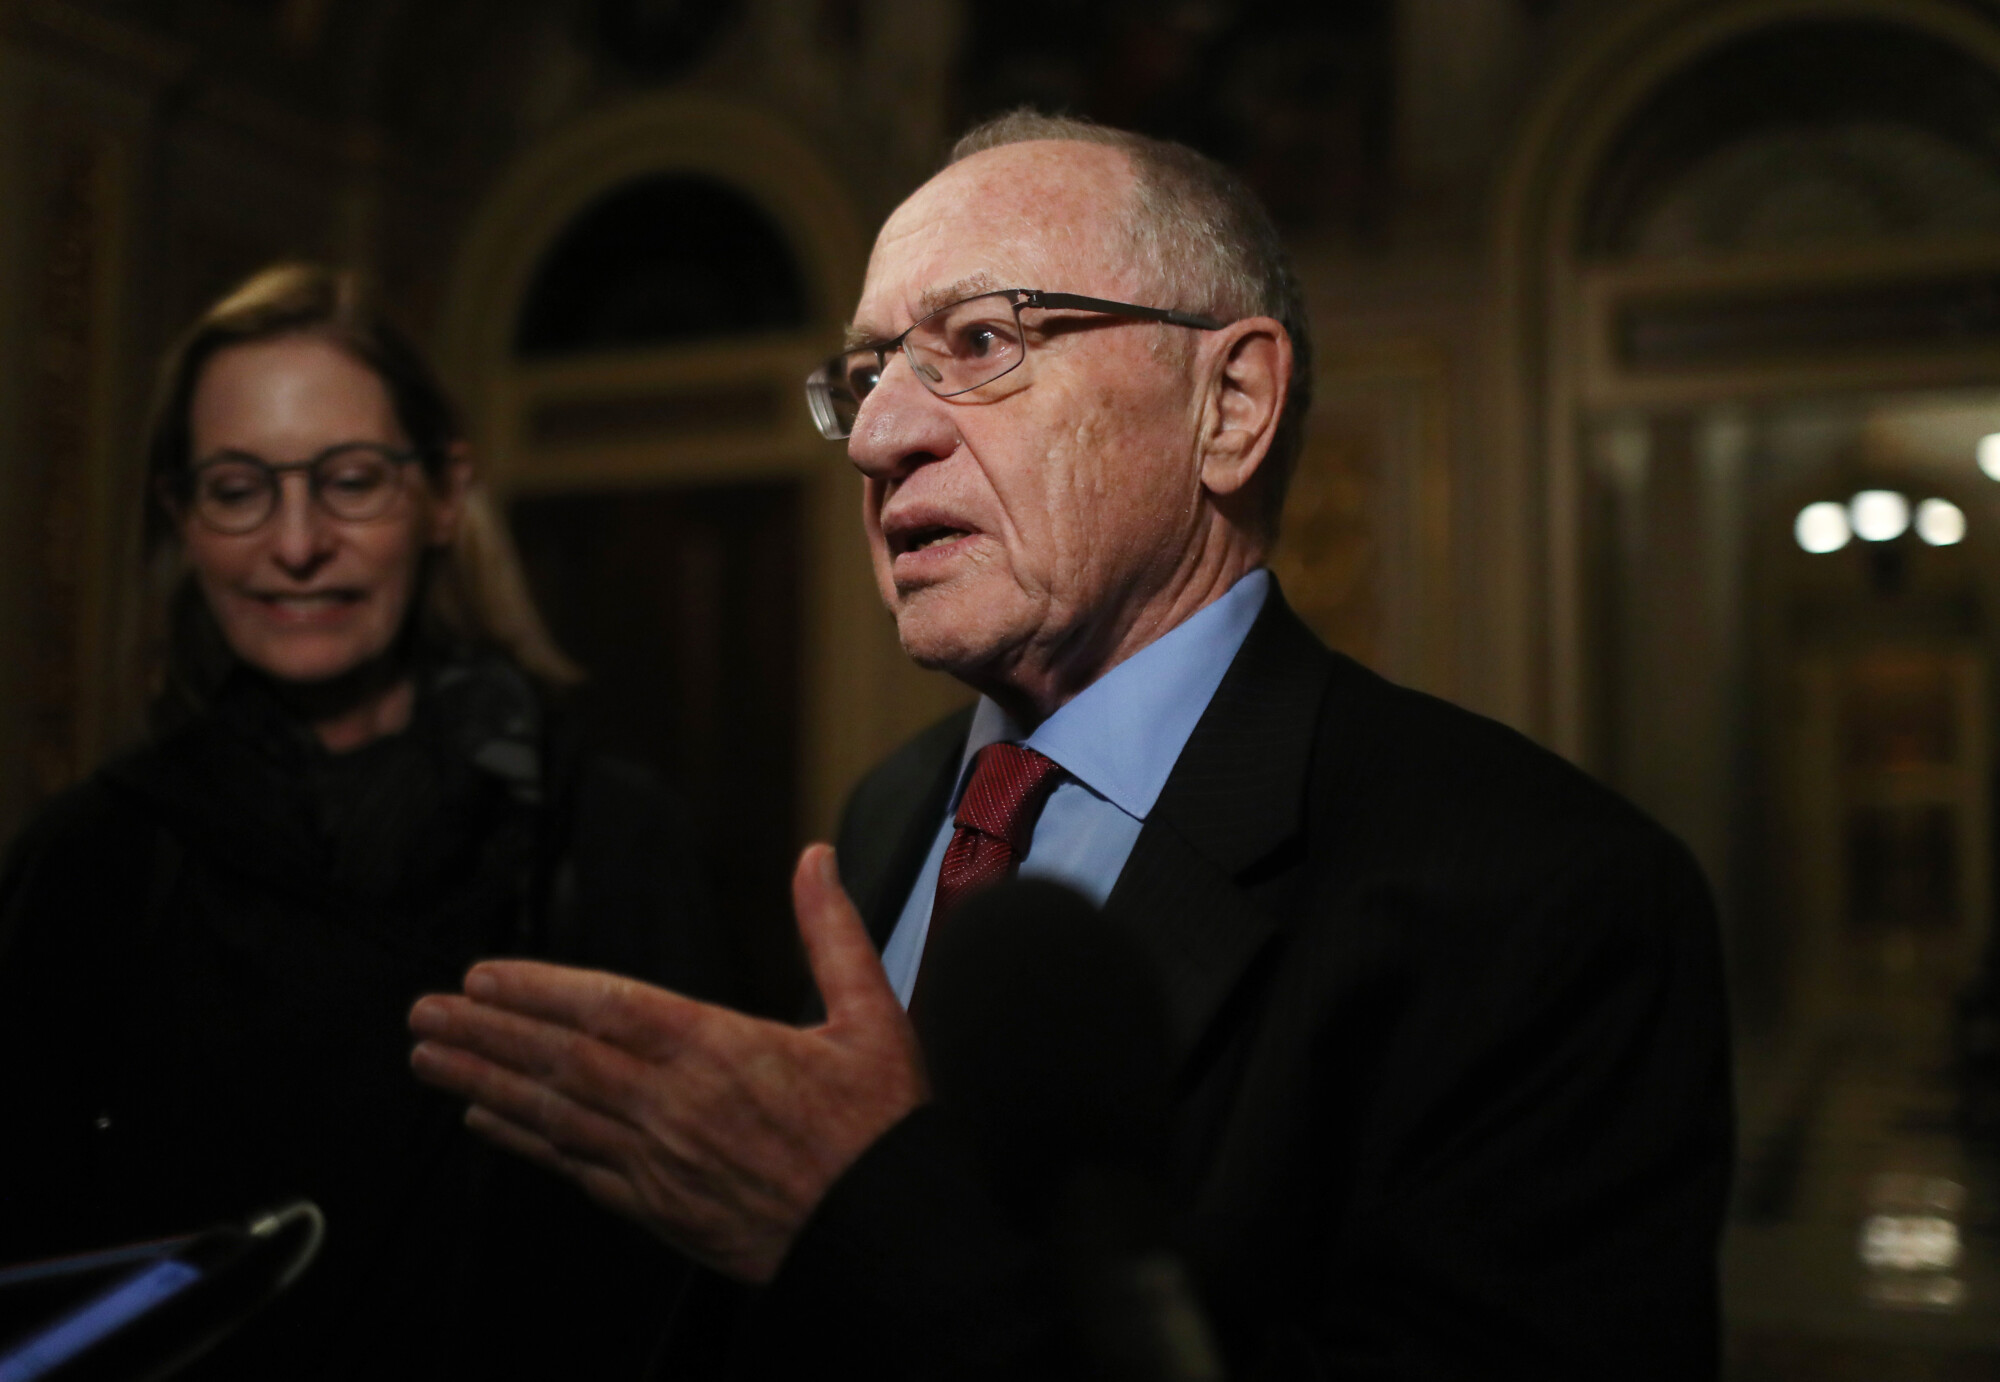 Law Professor Dershowitz Outlines Legal Possibilities for Senate on Upcoming Trump Impeachment Trial